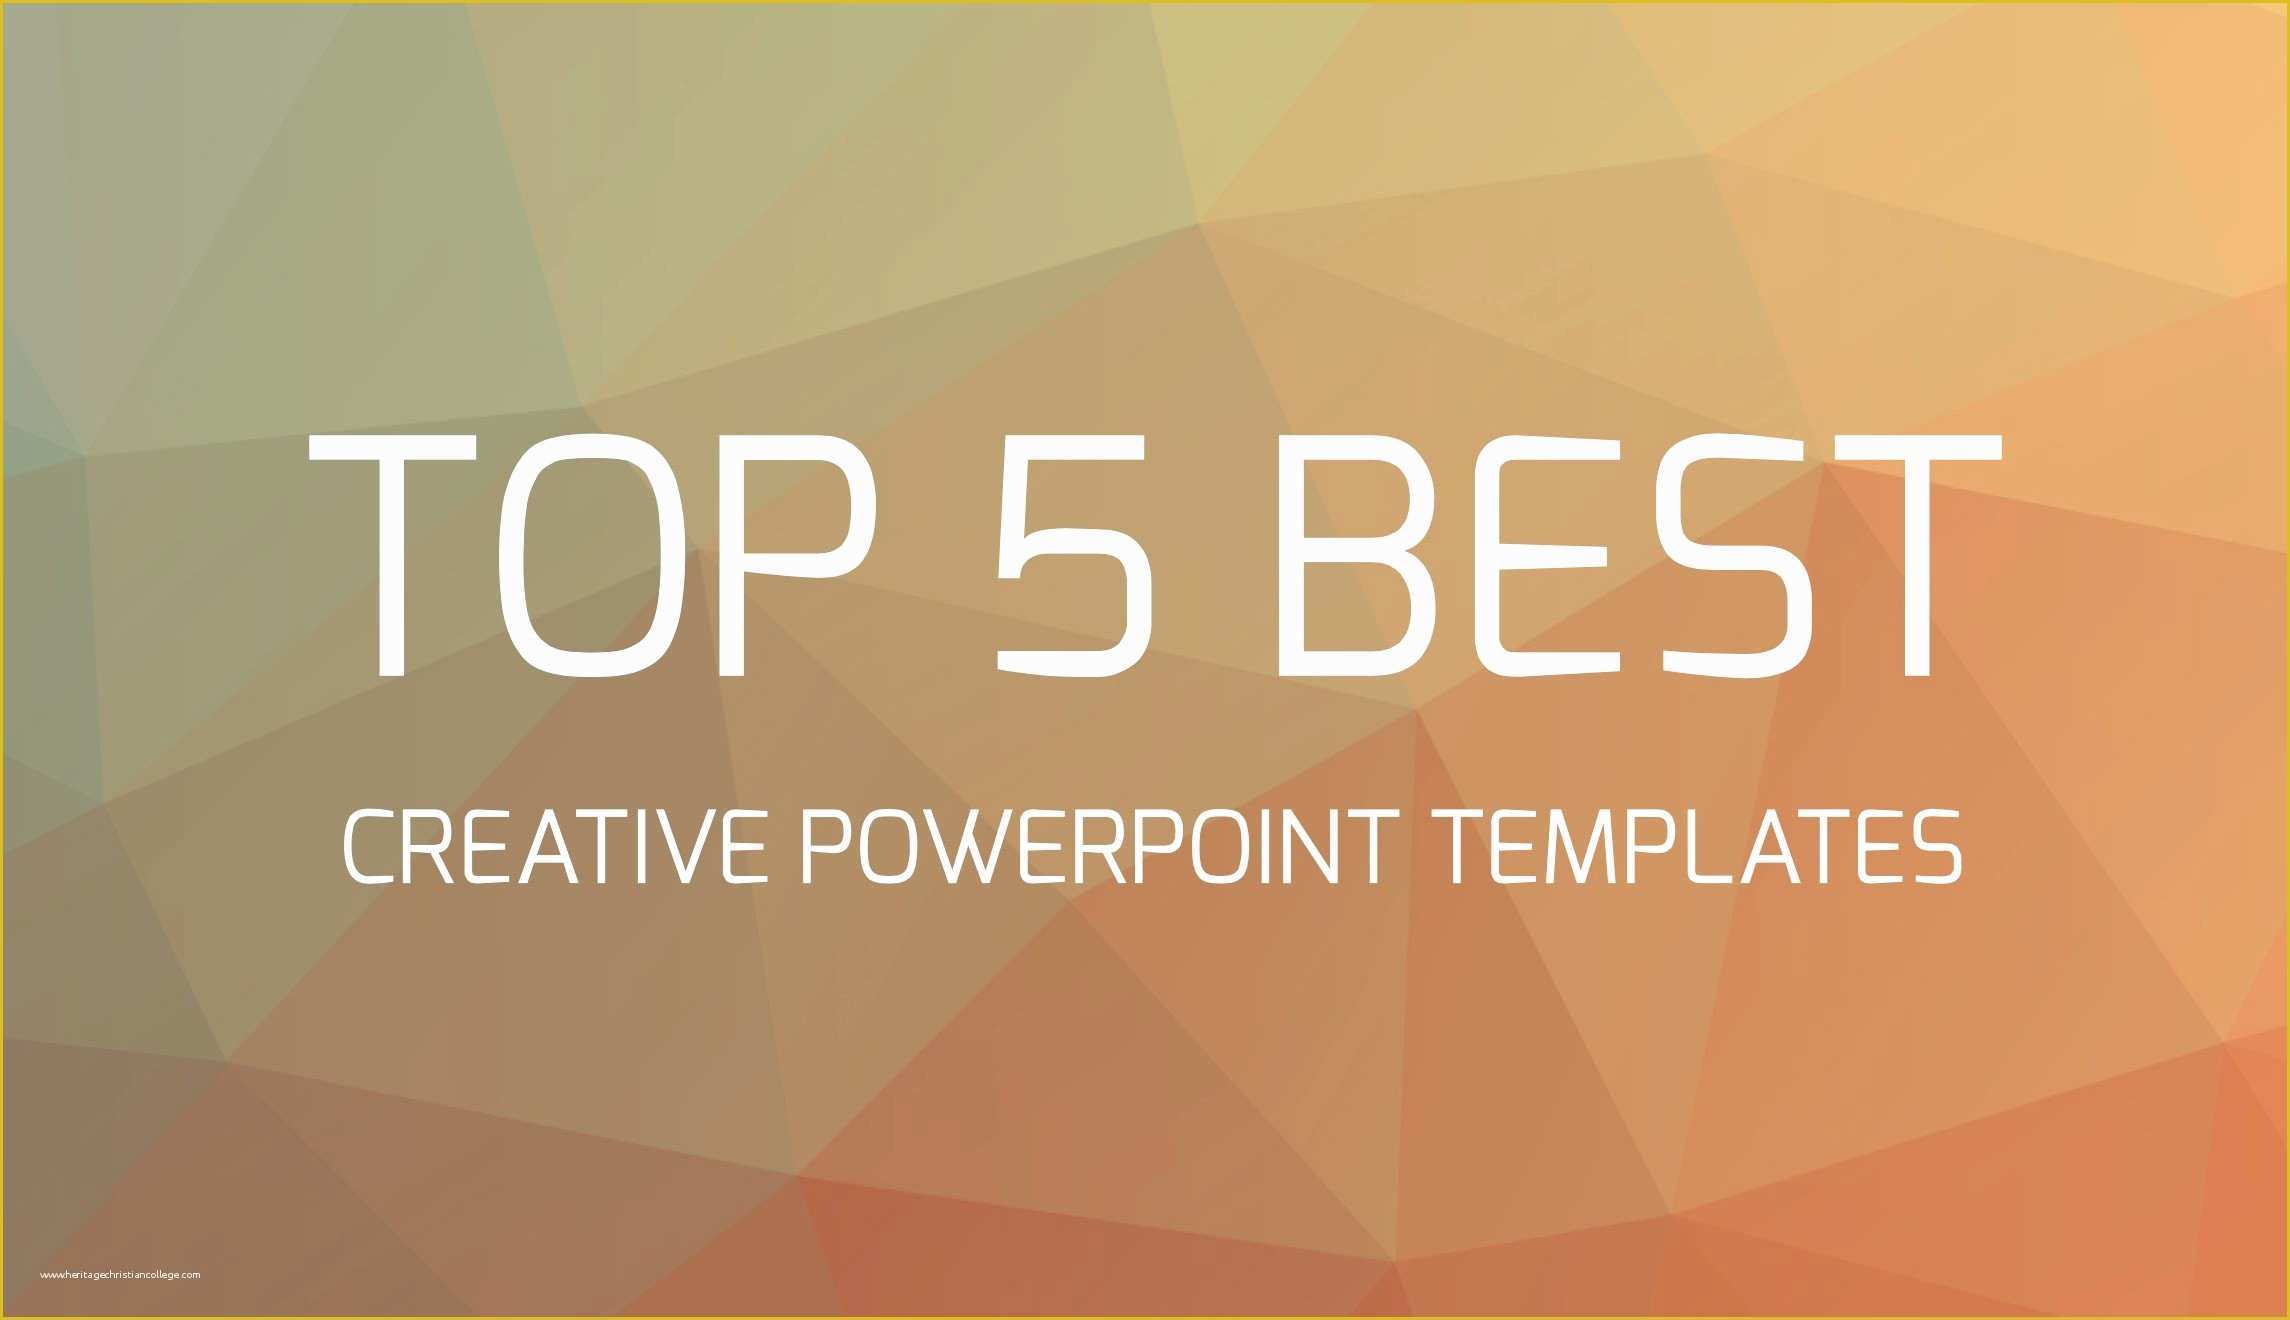 Cool Powerpoint Templates Free Of 42 Cool Powerpoint Backgrounds ·① Download Free Awesome